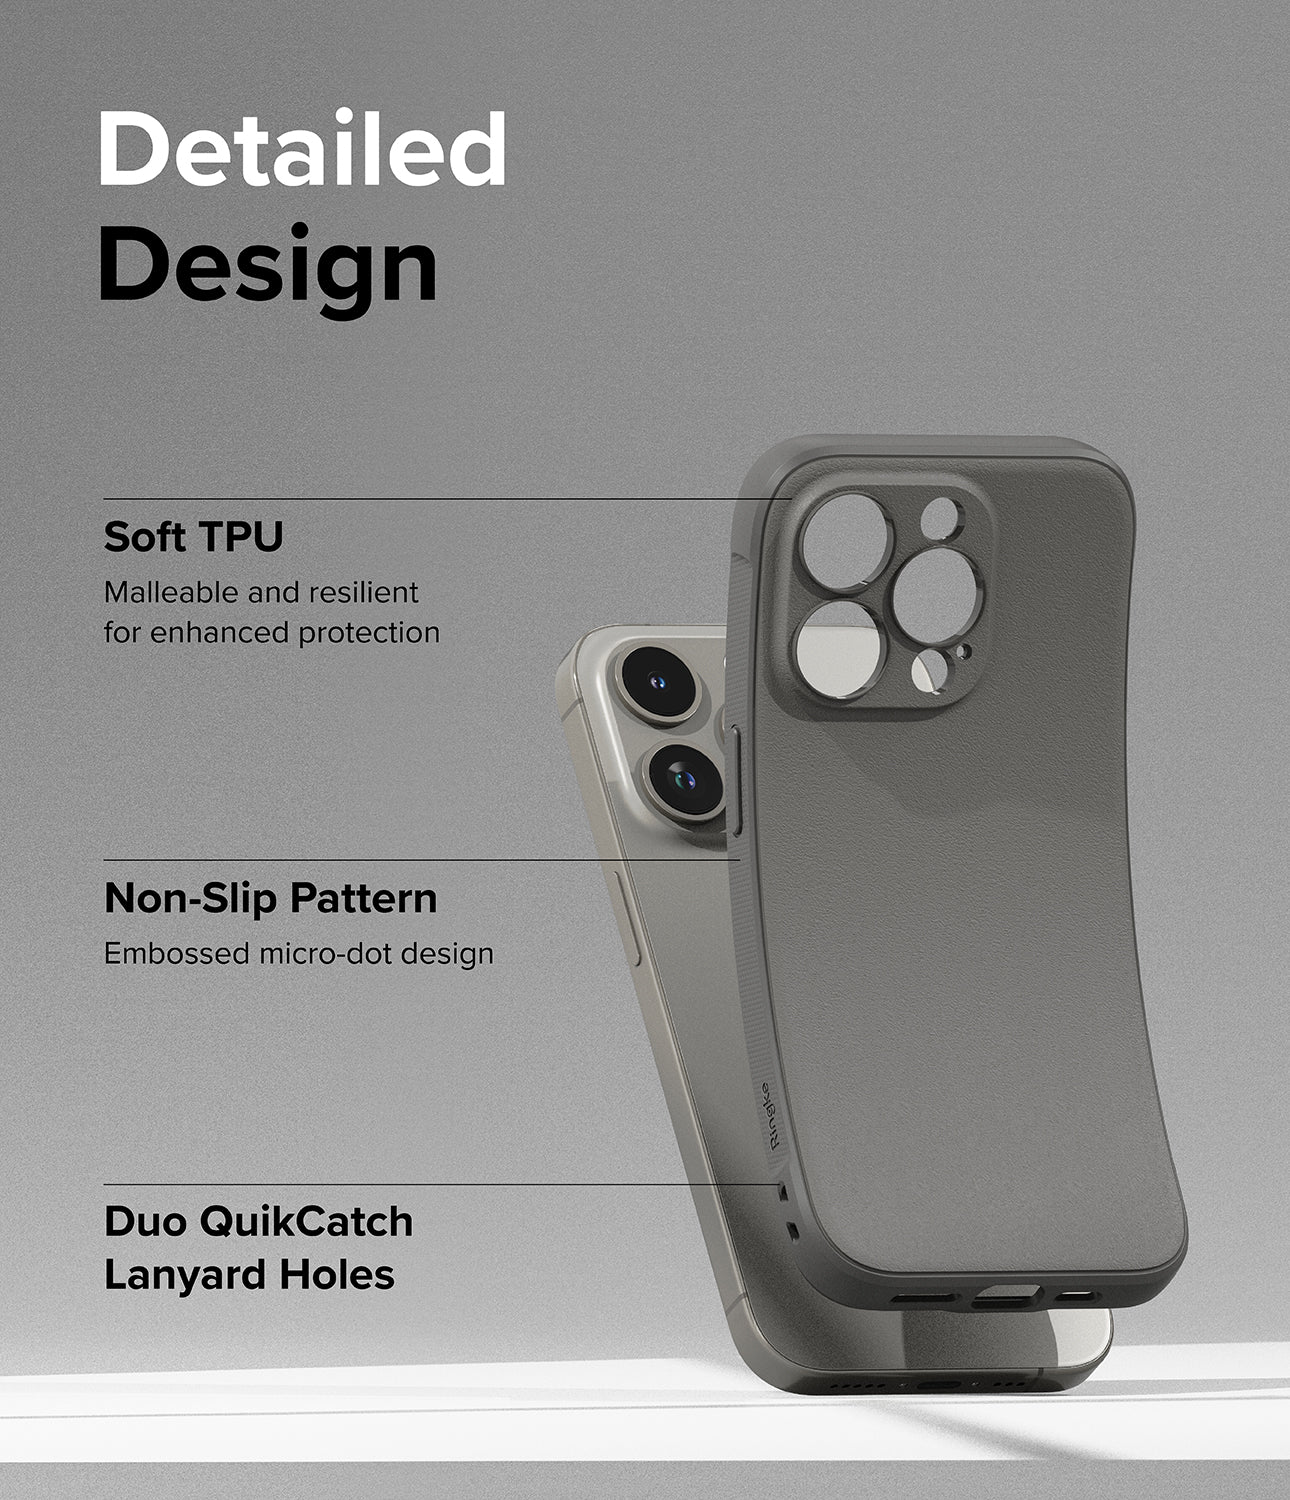 iPhone 15 Pro Case | Onyx - Gray - Detailed Design. Malleable and resilient for enhanced protection with Soft TPU. Embossed micro-dot design with Non-Slip Pattern. Duo QuikCatch Lanyard Holes.